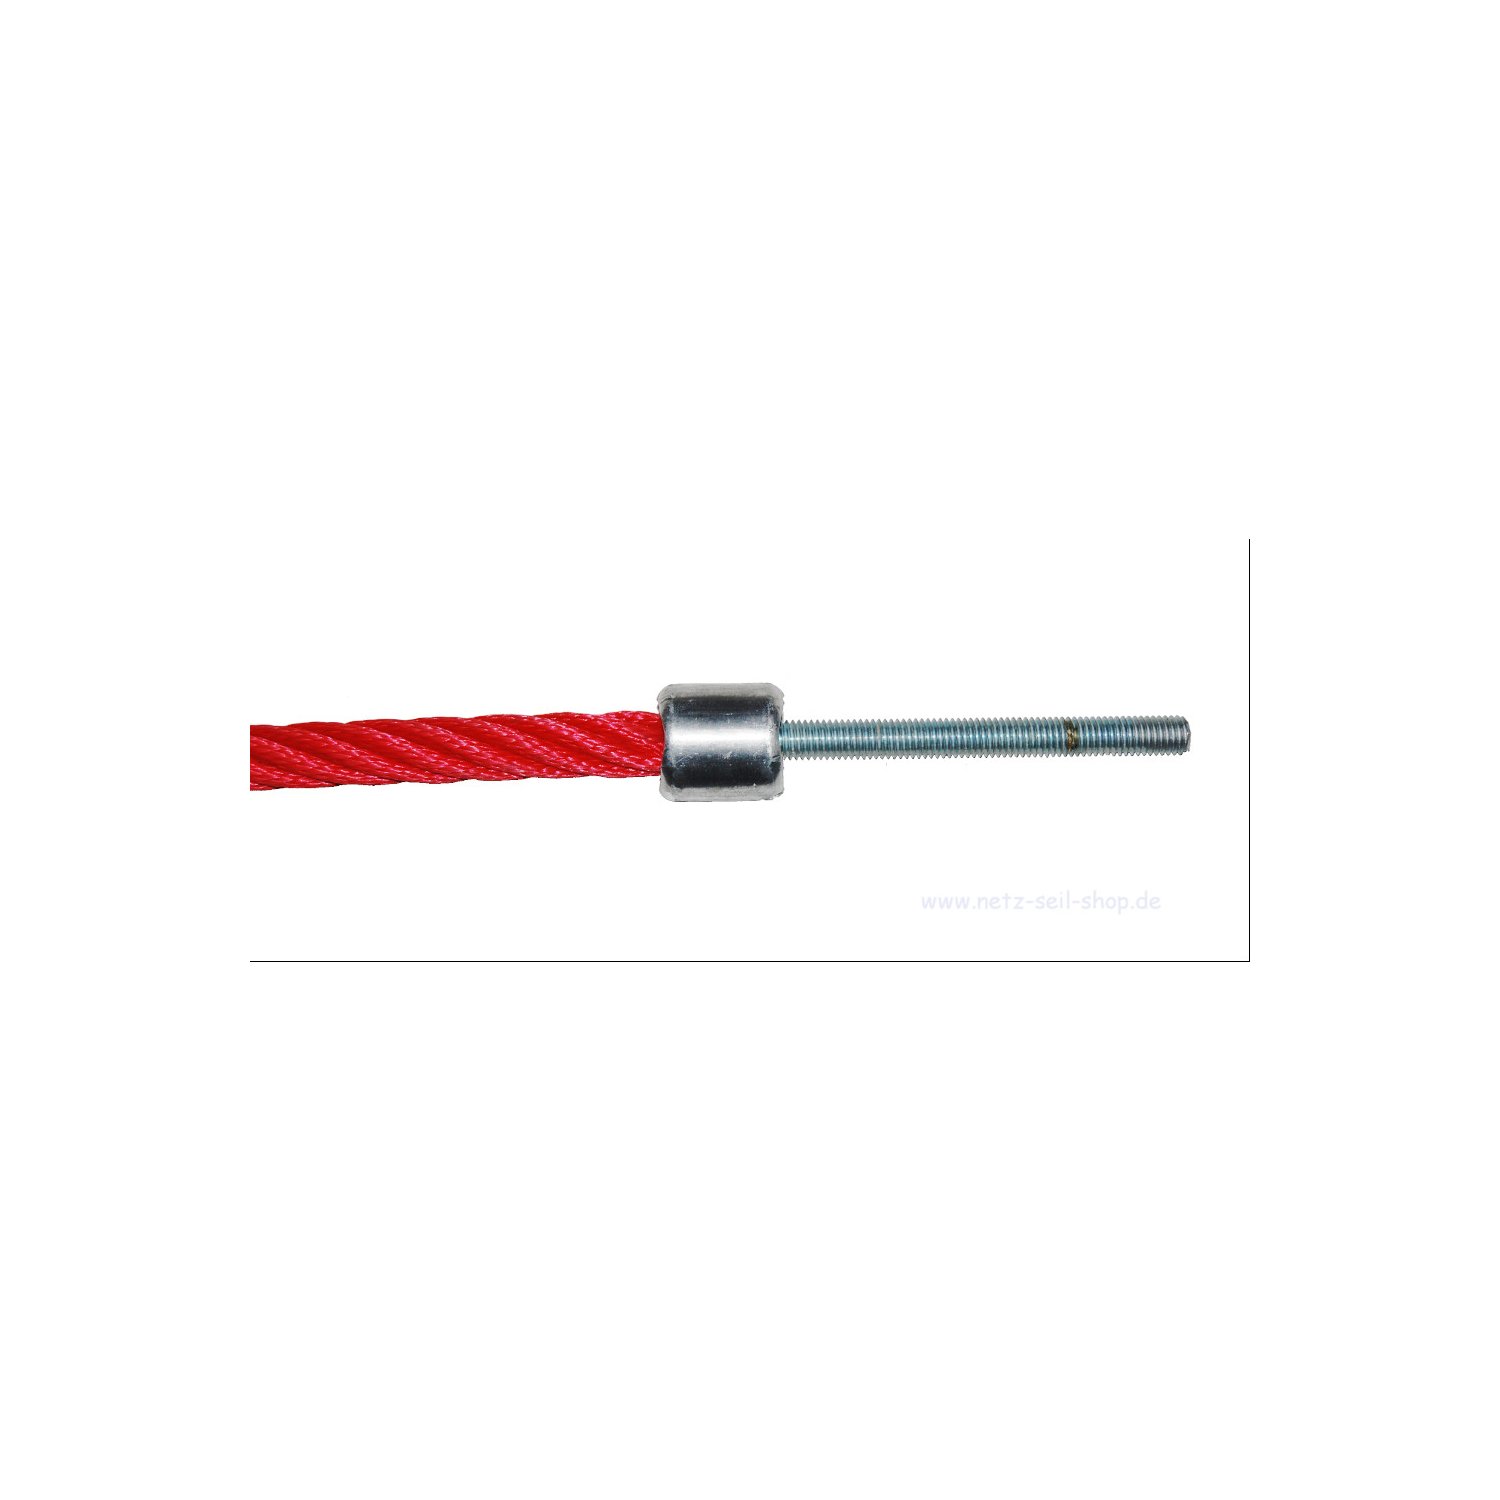 Threaded bolt M12 x 200 mm, galvanised, directly pressed [10,71 EUR]